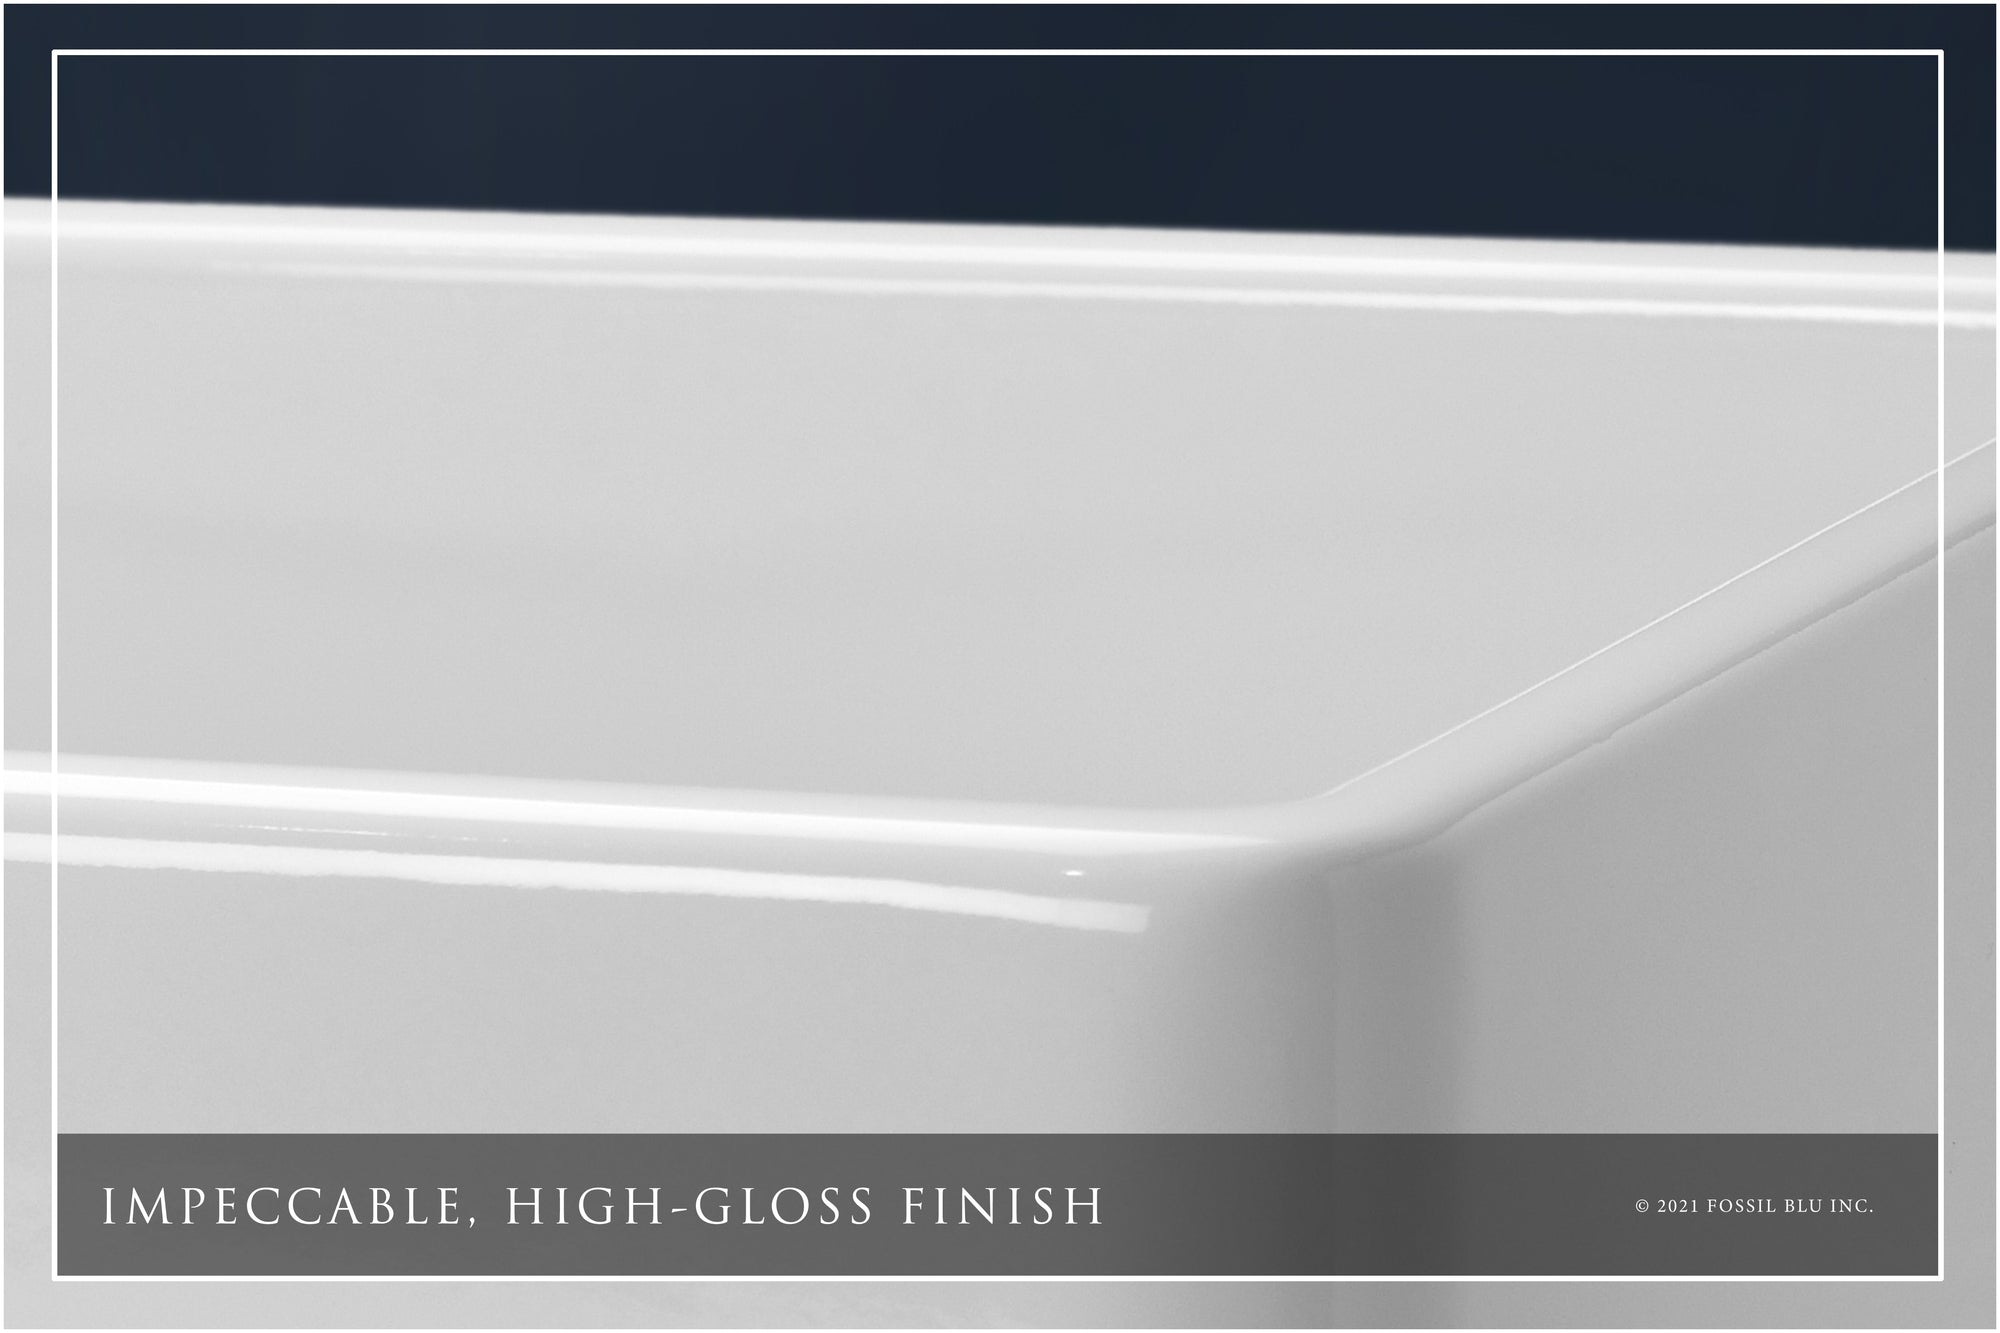 FSW1000 LUXURY 26-INCH SOLID FIRECLAY FARMHOUSE SINK IN WHITE, STAINLESS STEEL ACCS, FLAT FRONT